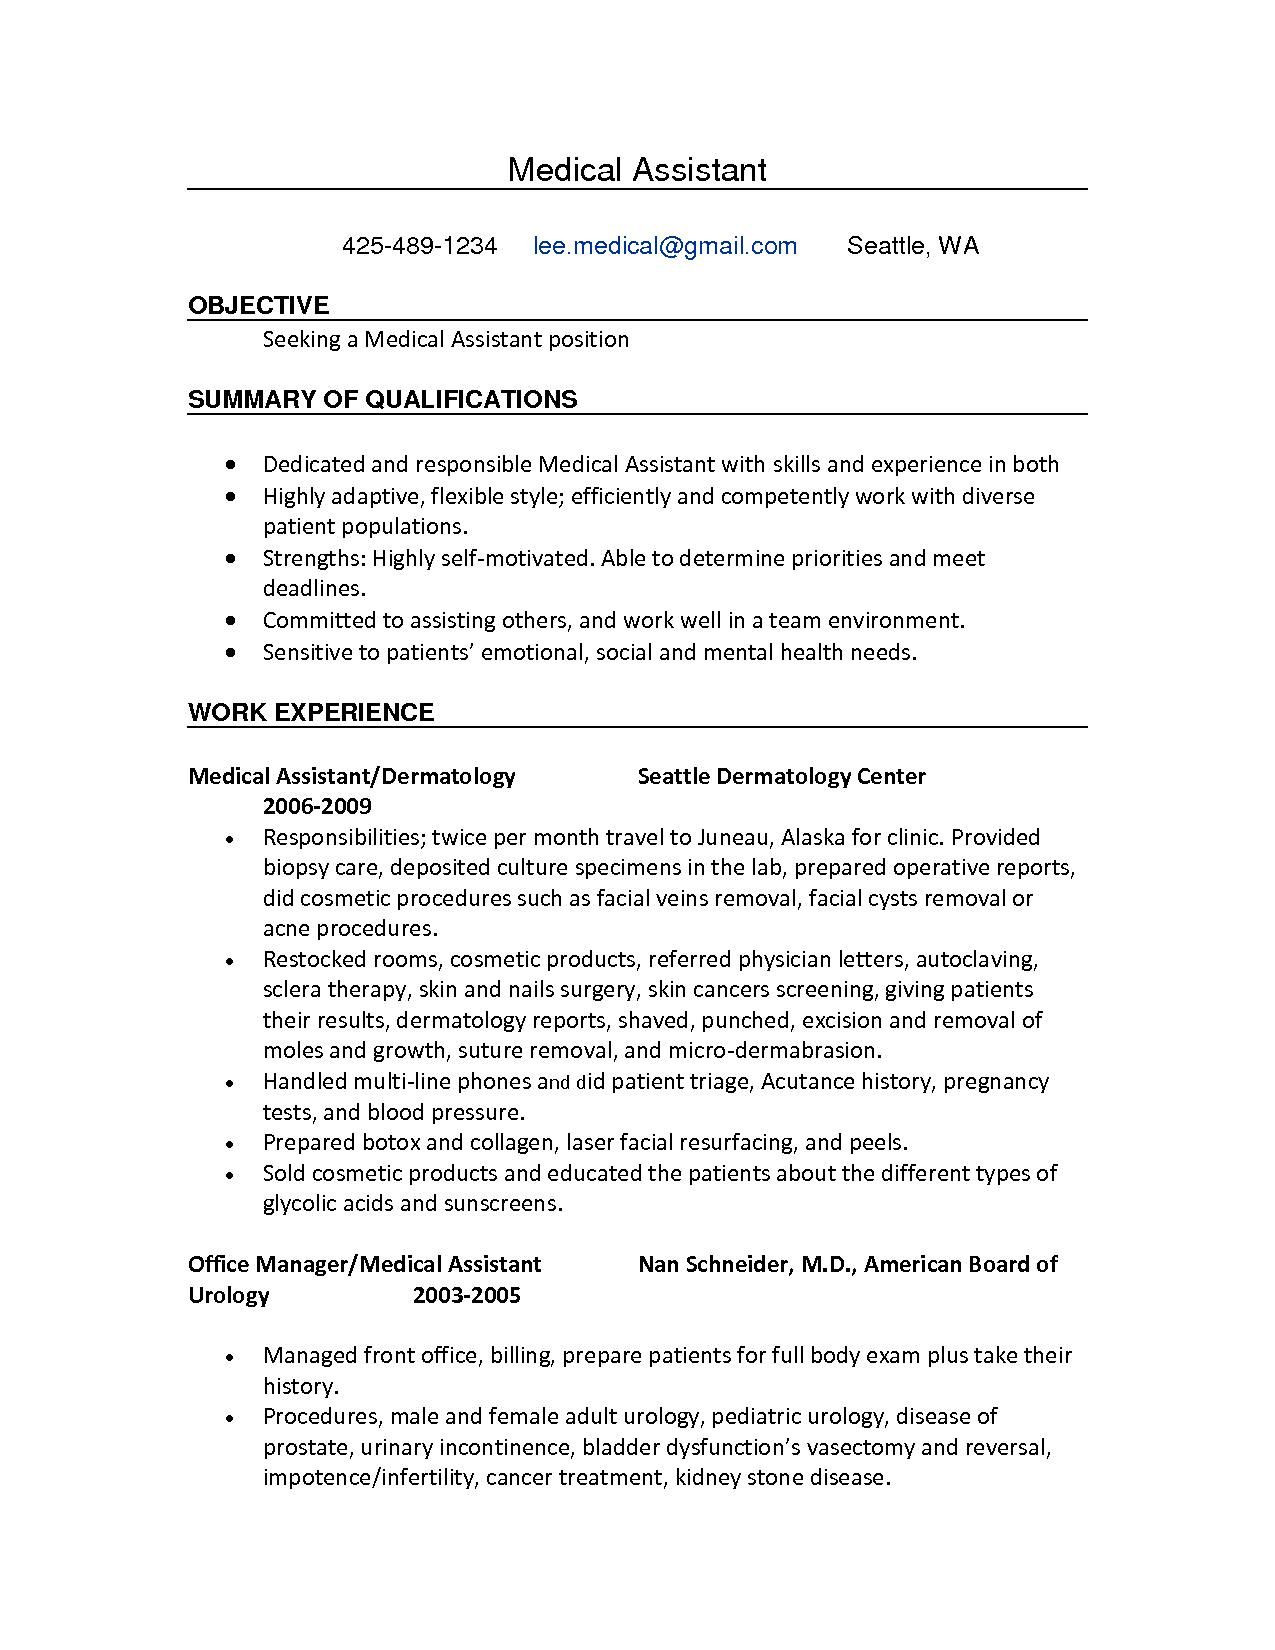 Resume Sample for Administrative assistant with No Experience Resumes for Medical assistants with No Experience – top Medical …